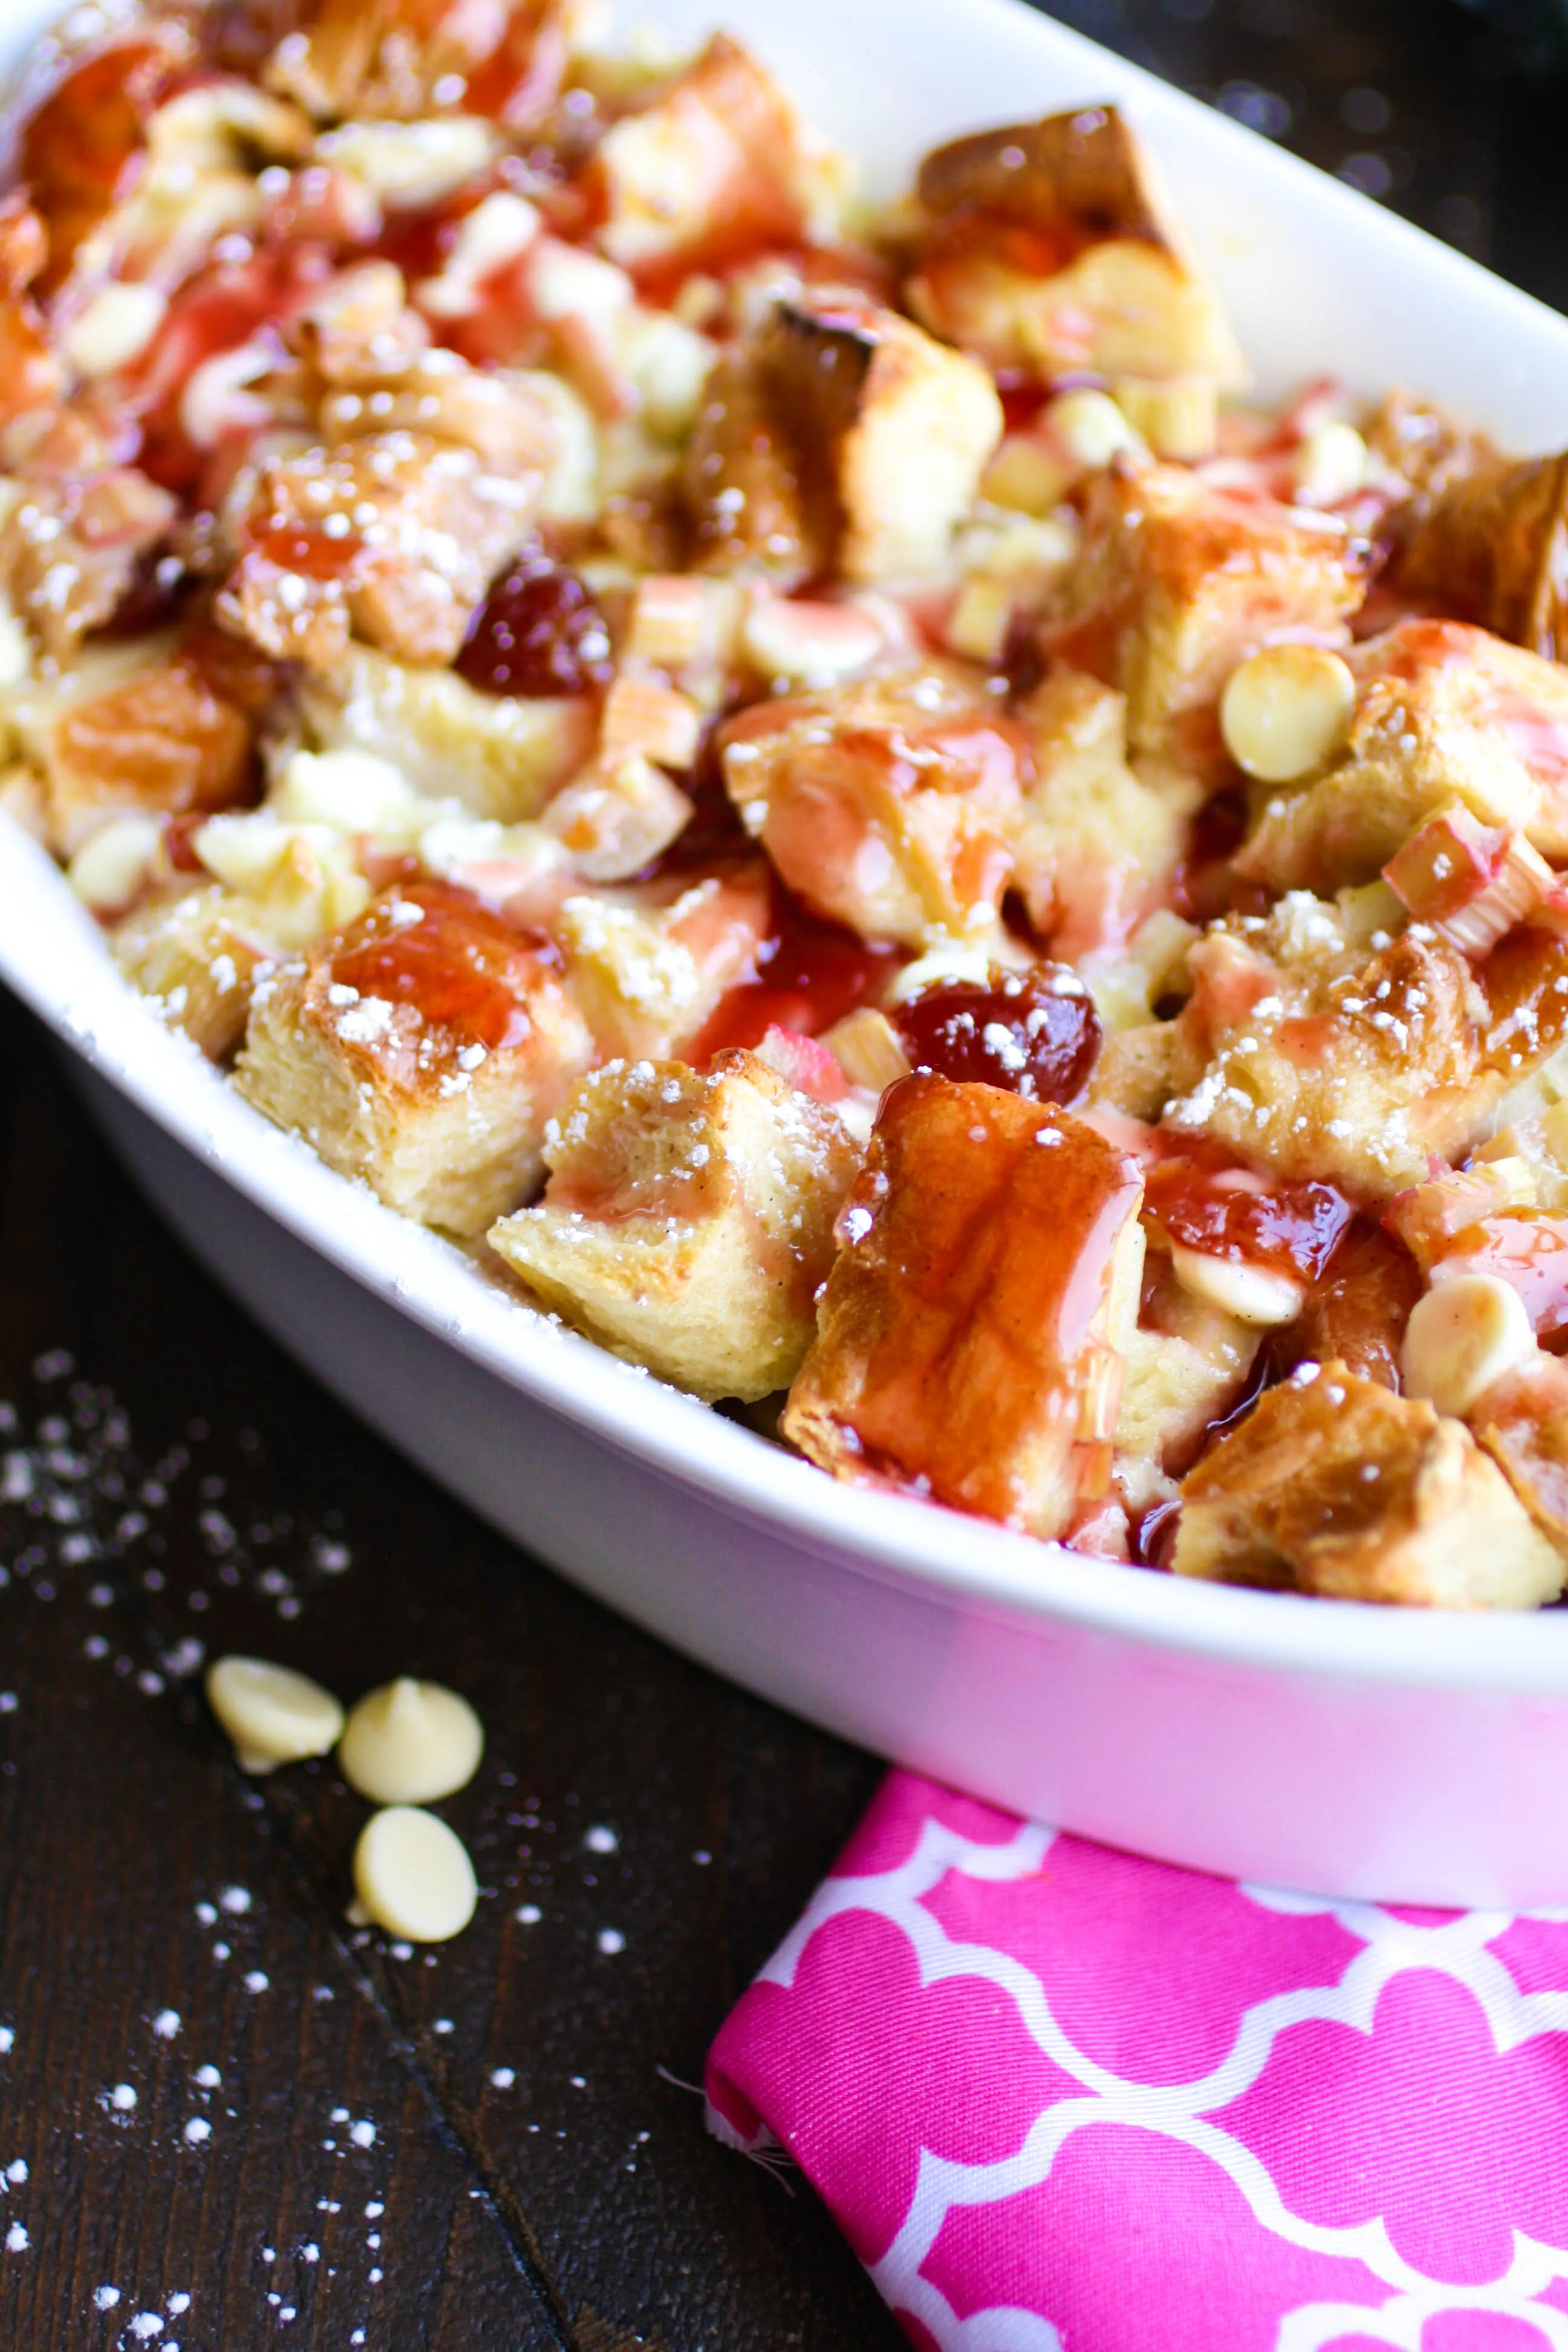 Cherry-Rhubarb and White Chocolate Bread Pudding is a sweet-tart treat that is amazing! Cherry-Rhubarb and White Chocolate Bread Pudding is an easy, springtime dessert you'll love!